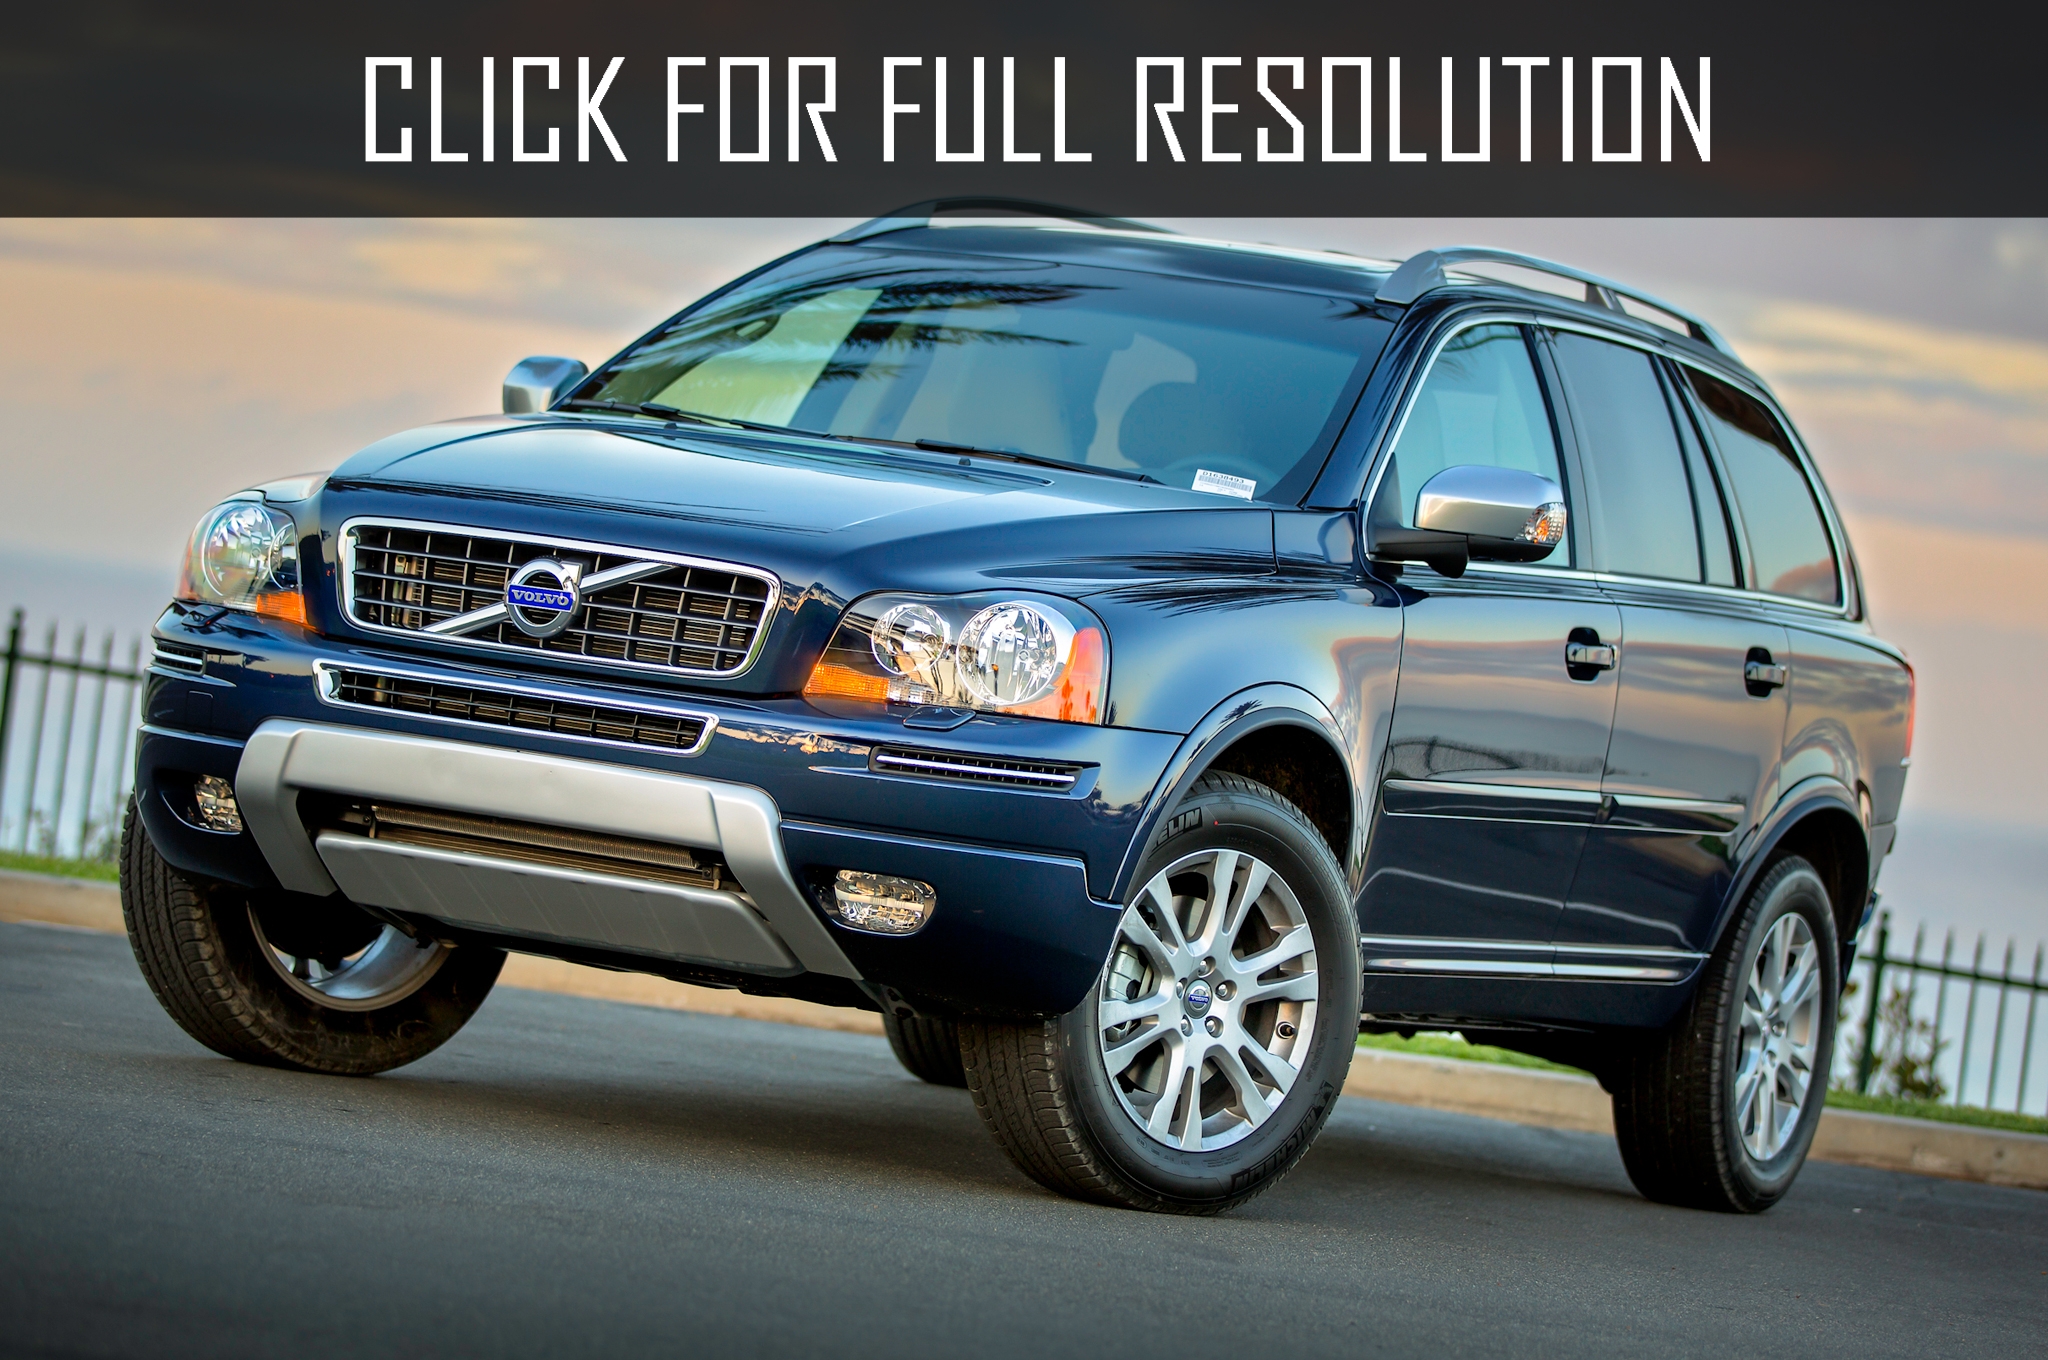 2014 Volvo Xc90 news, reviews, msrp, ratings with amazing images